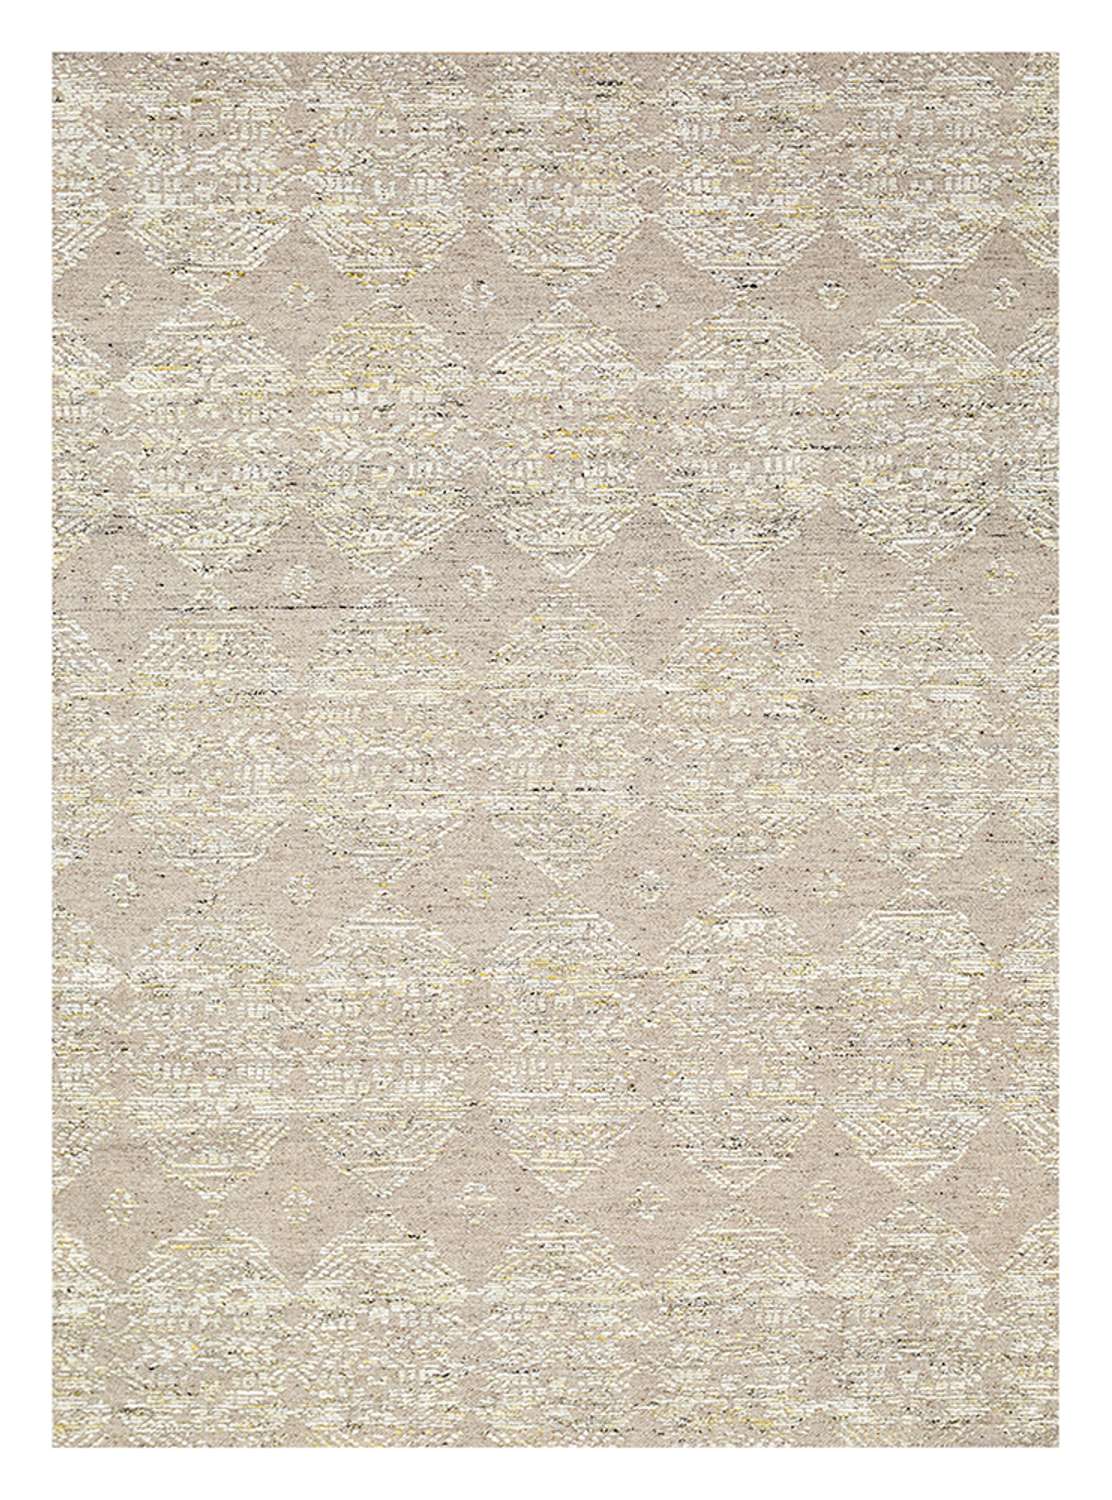 Wool Rug - Rulle - rectangle